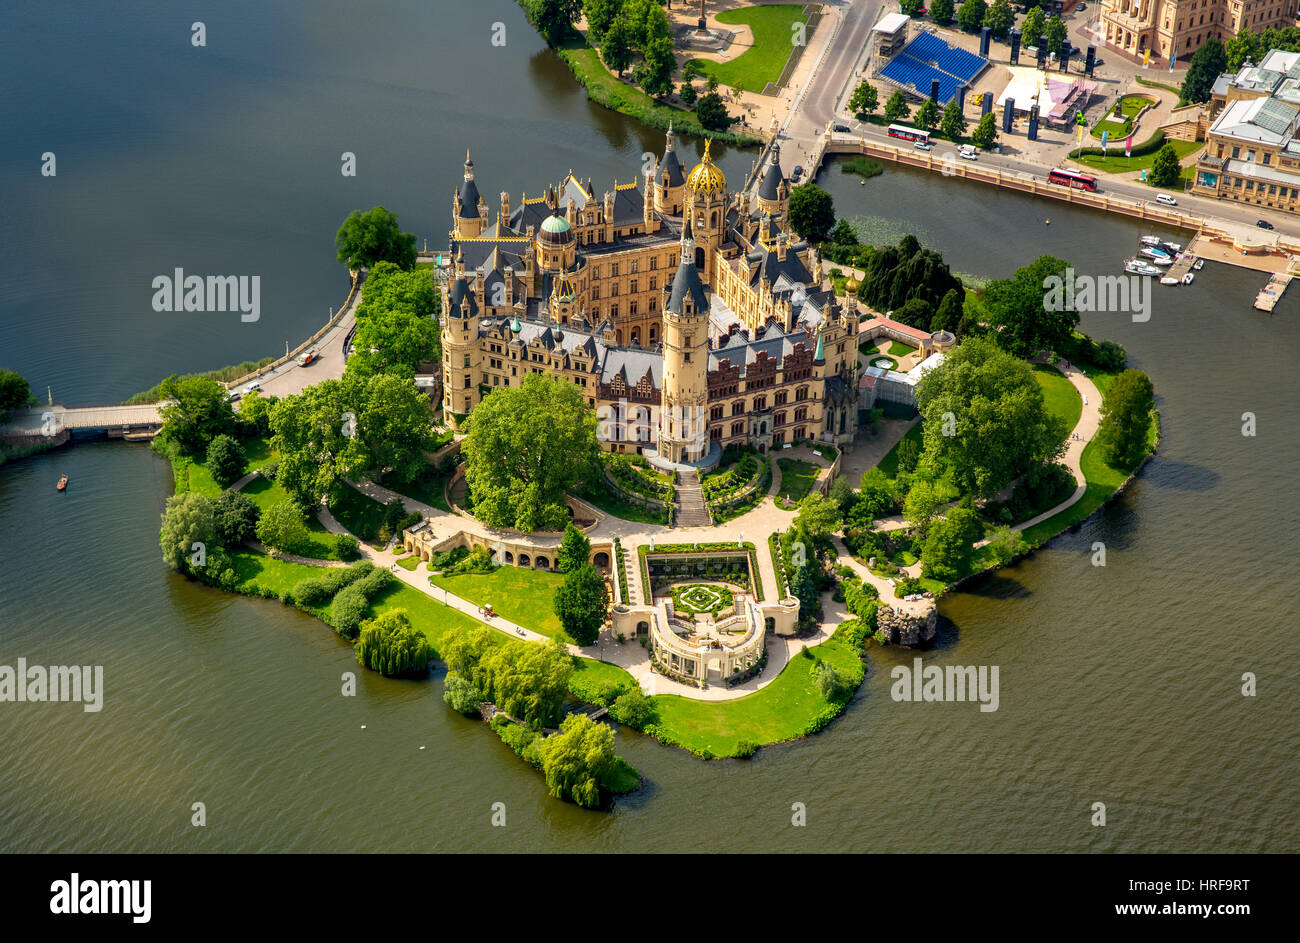 Castle Schwerin with castle garden and castle lake, Lake Schwerin, Schwerin, Mecklenburg-Western Pomerania, Germany Stock Photo